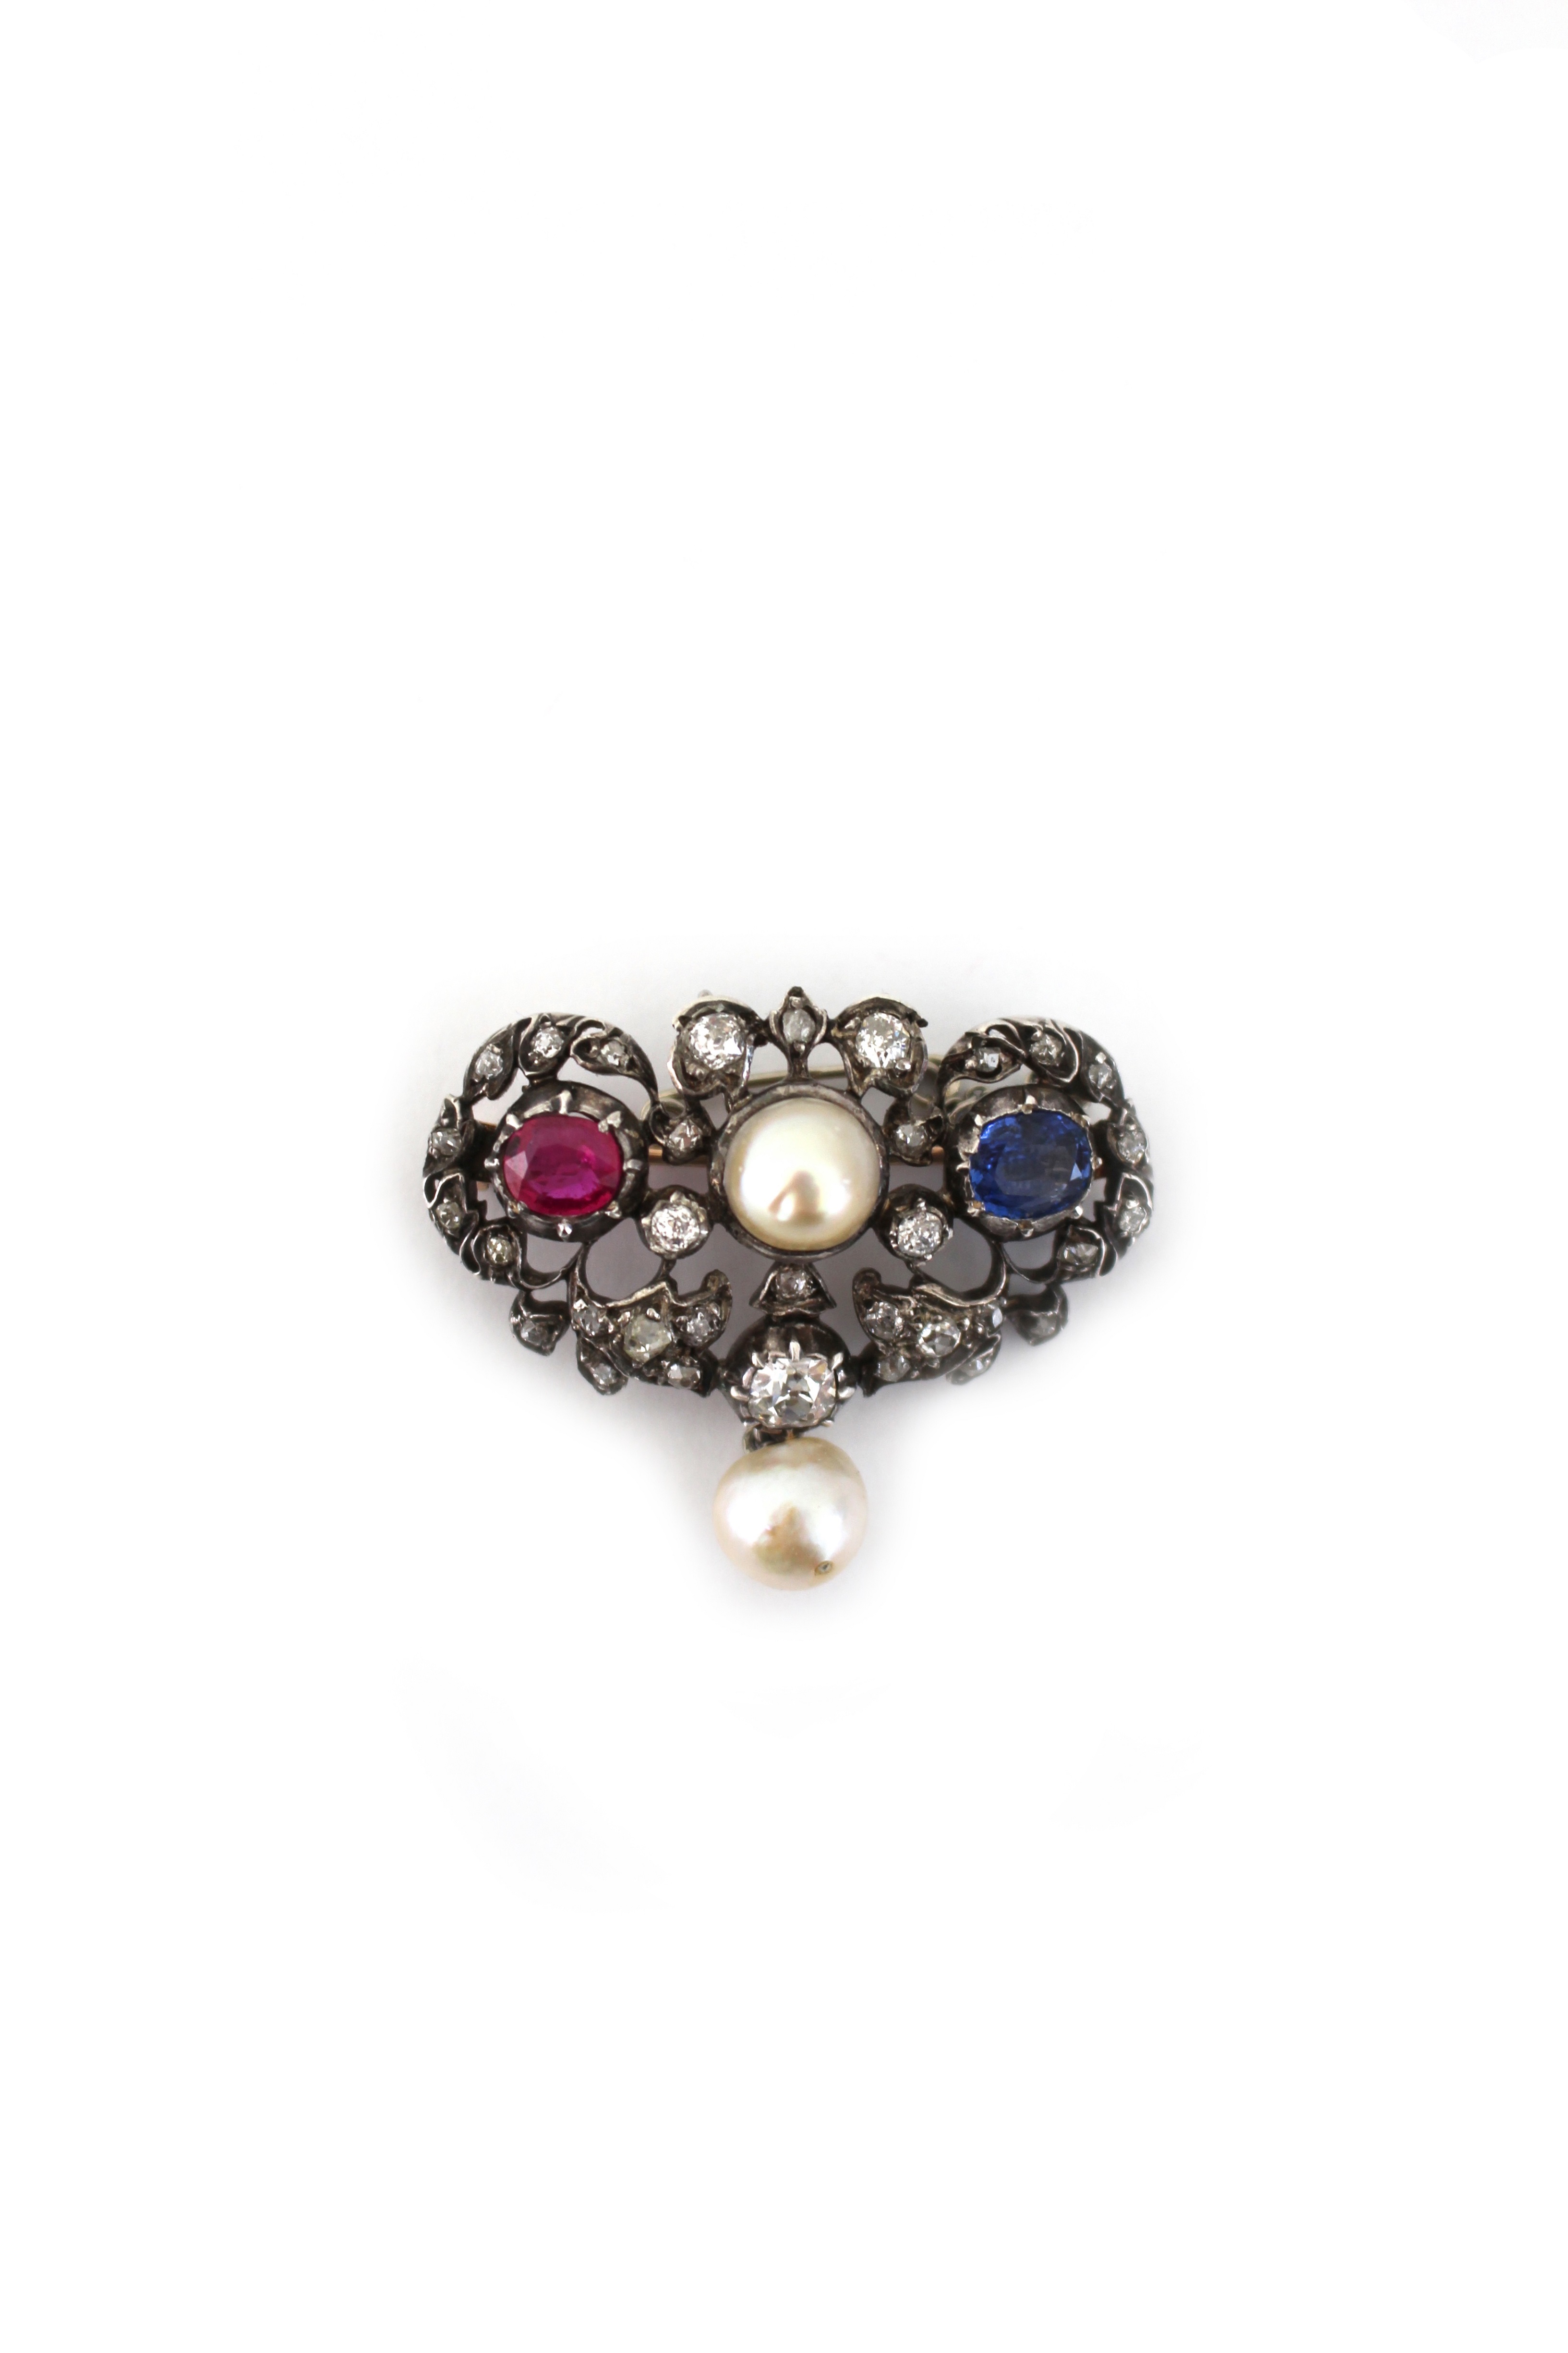 Circa 1900s Diamond Brooch with Ruby, Sapphire and pearls. 